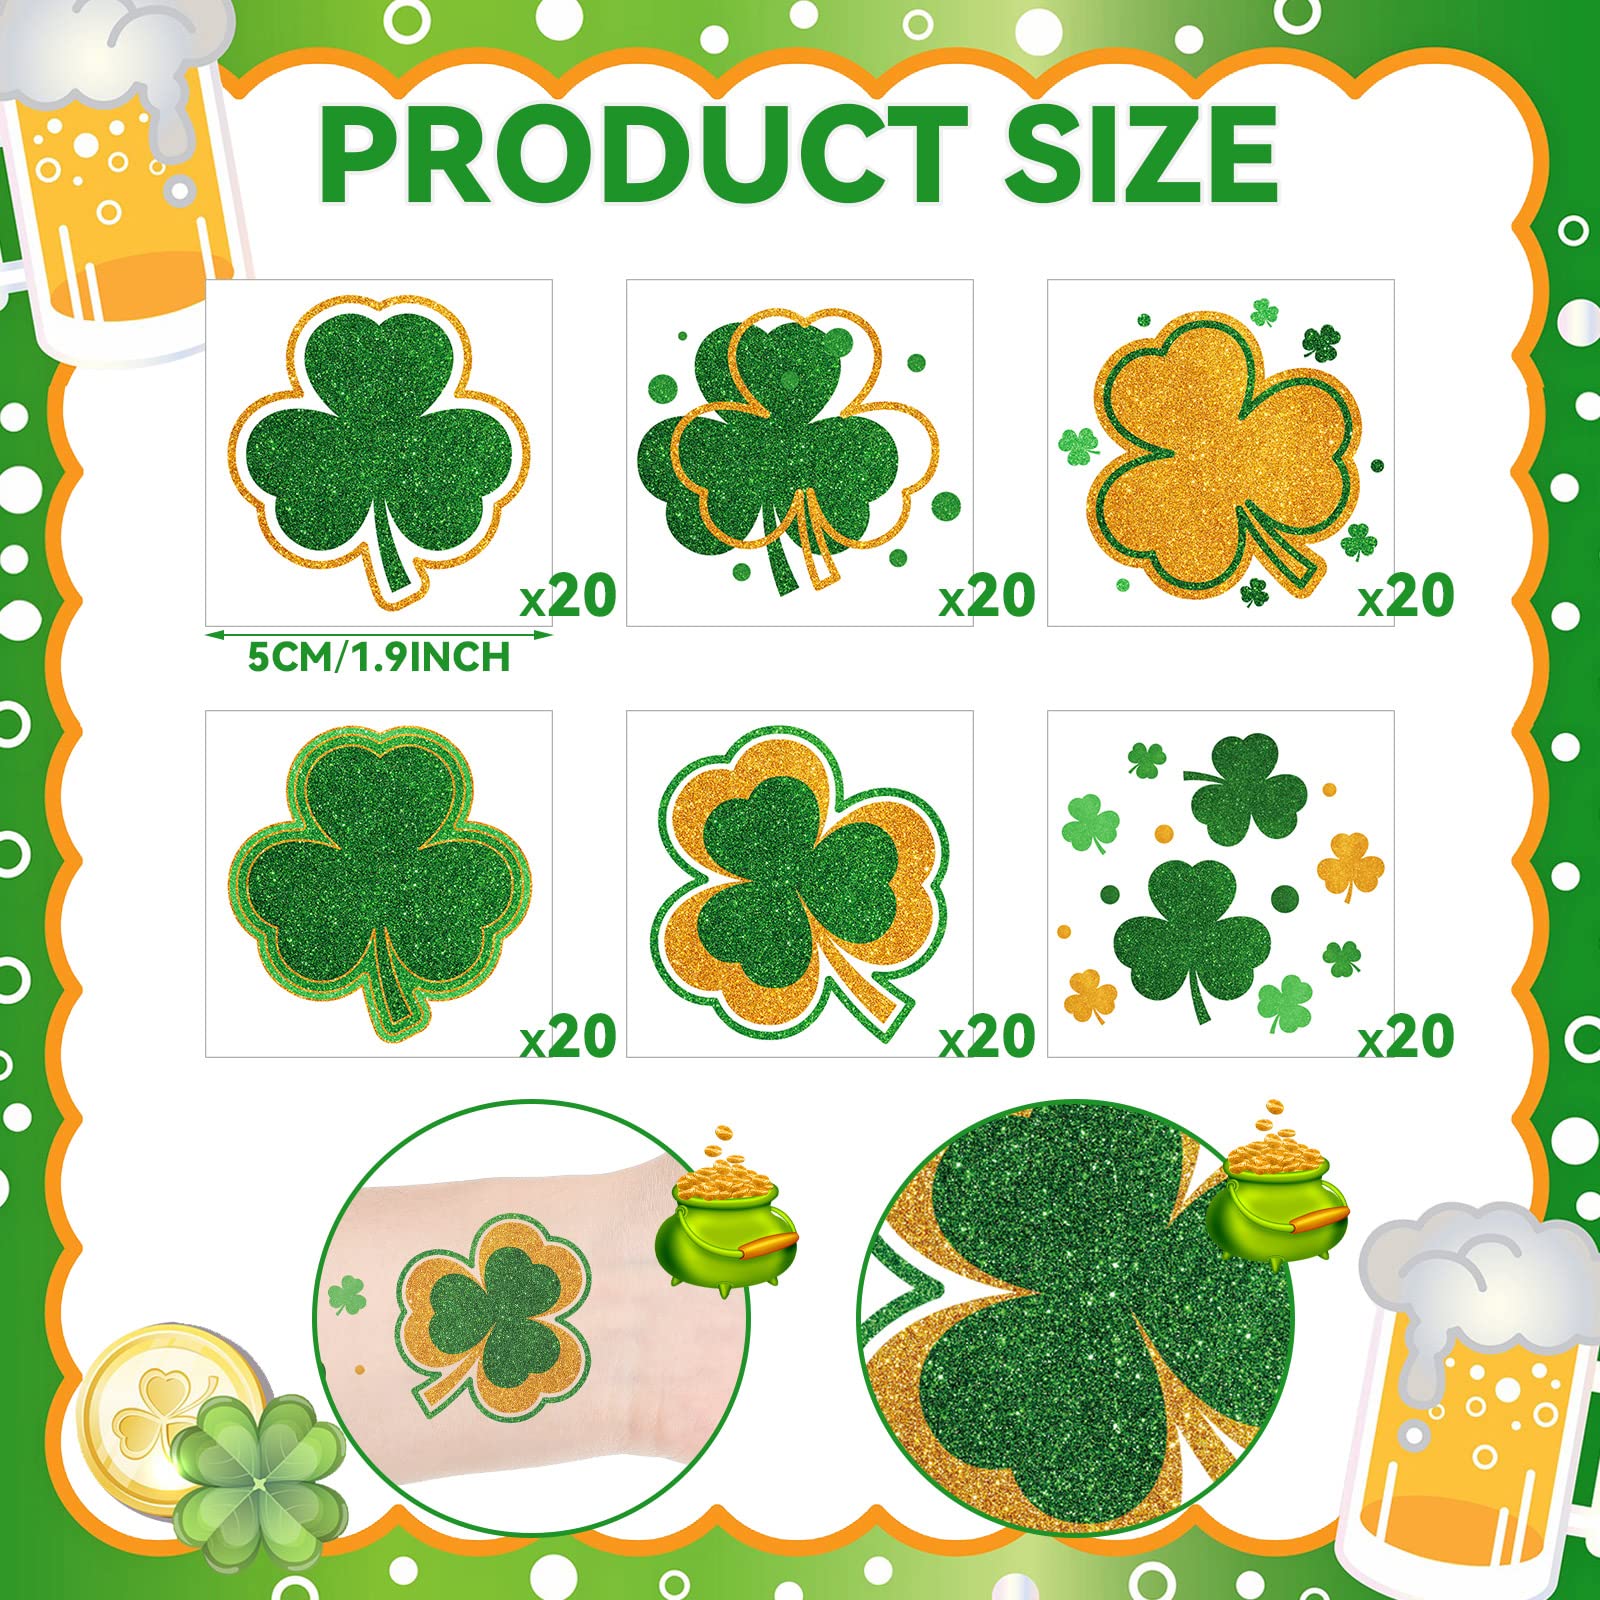 120 Pieces Glitter Shamrock Tattoo Stickers St. Patrick's Day Clover Temporary Tattoos St Patricks Day Stickers Shamrock Sticker Irish St Patricks Day Decor Party Favors for Men Women